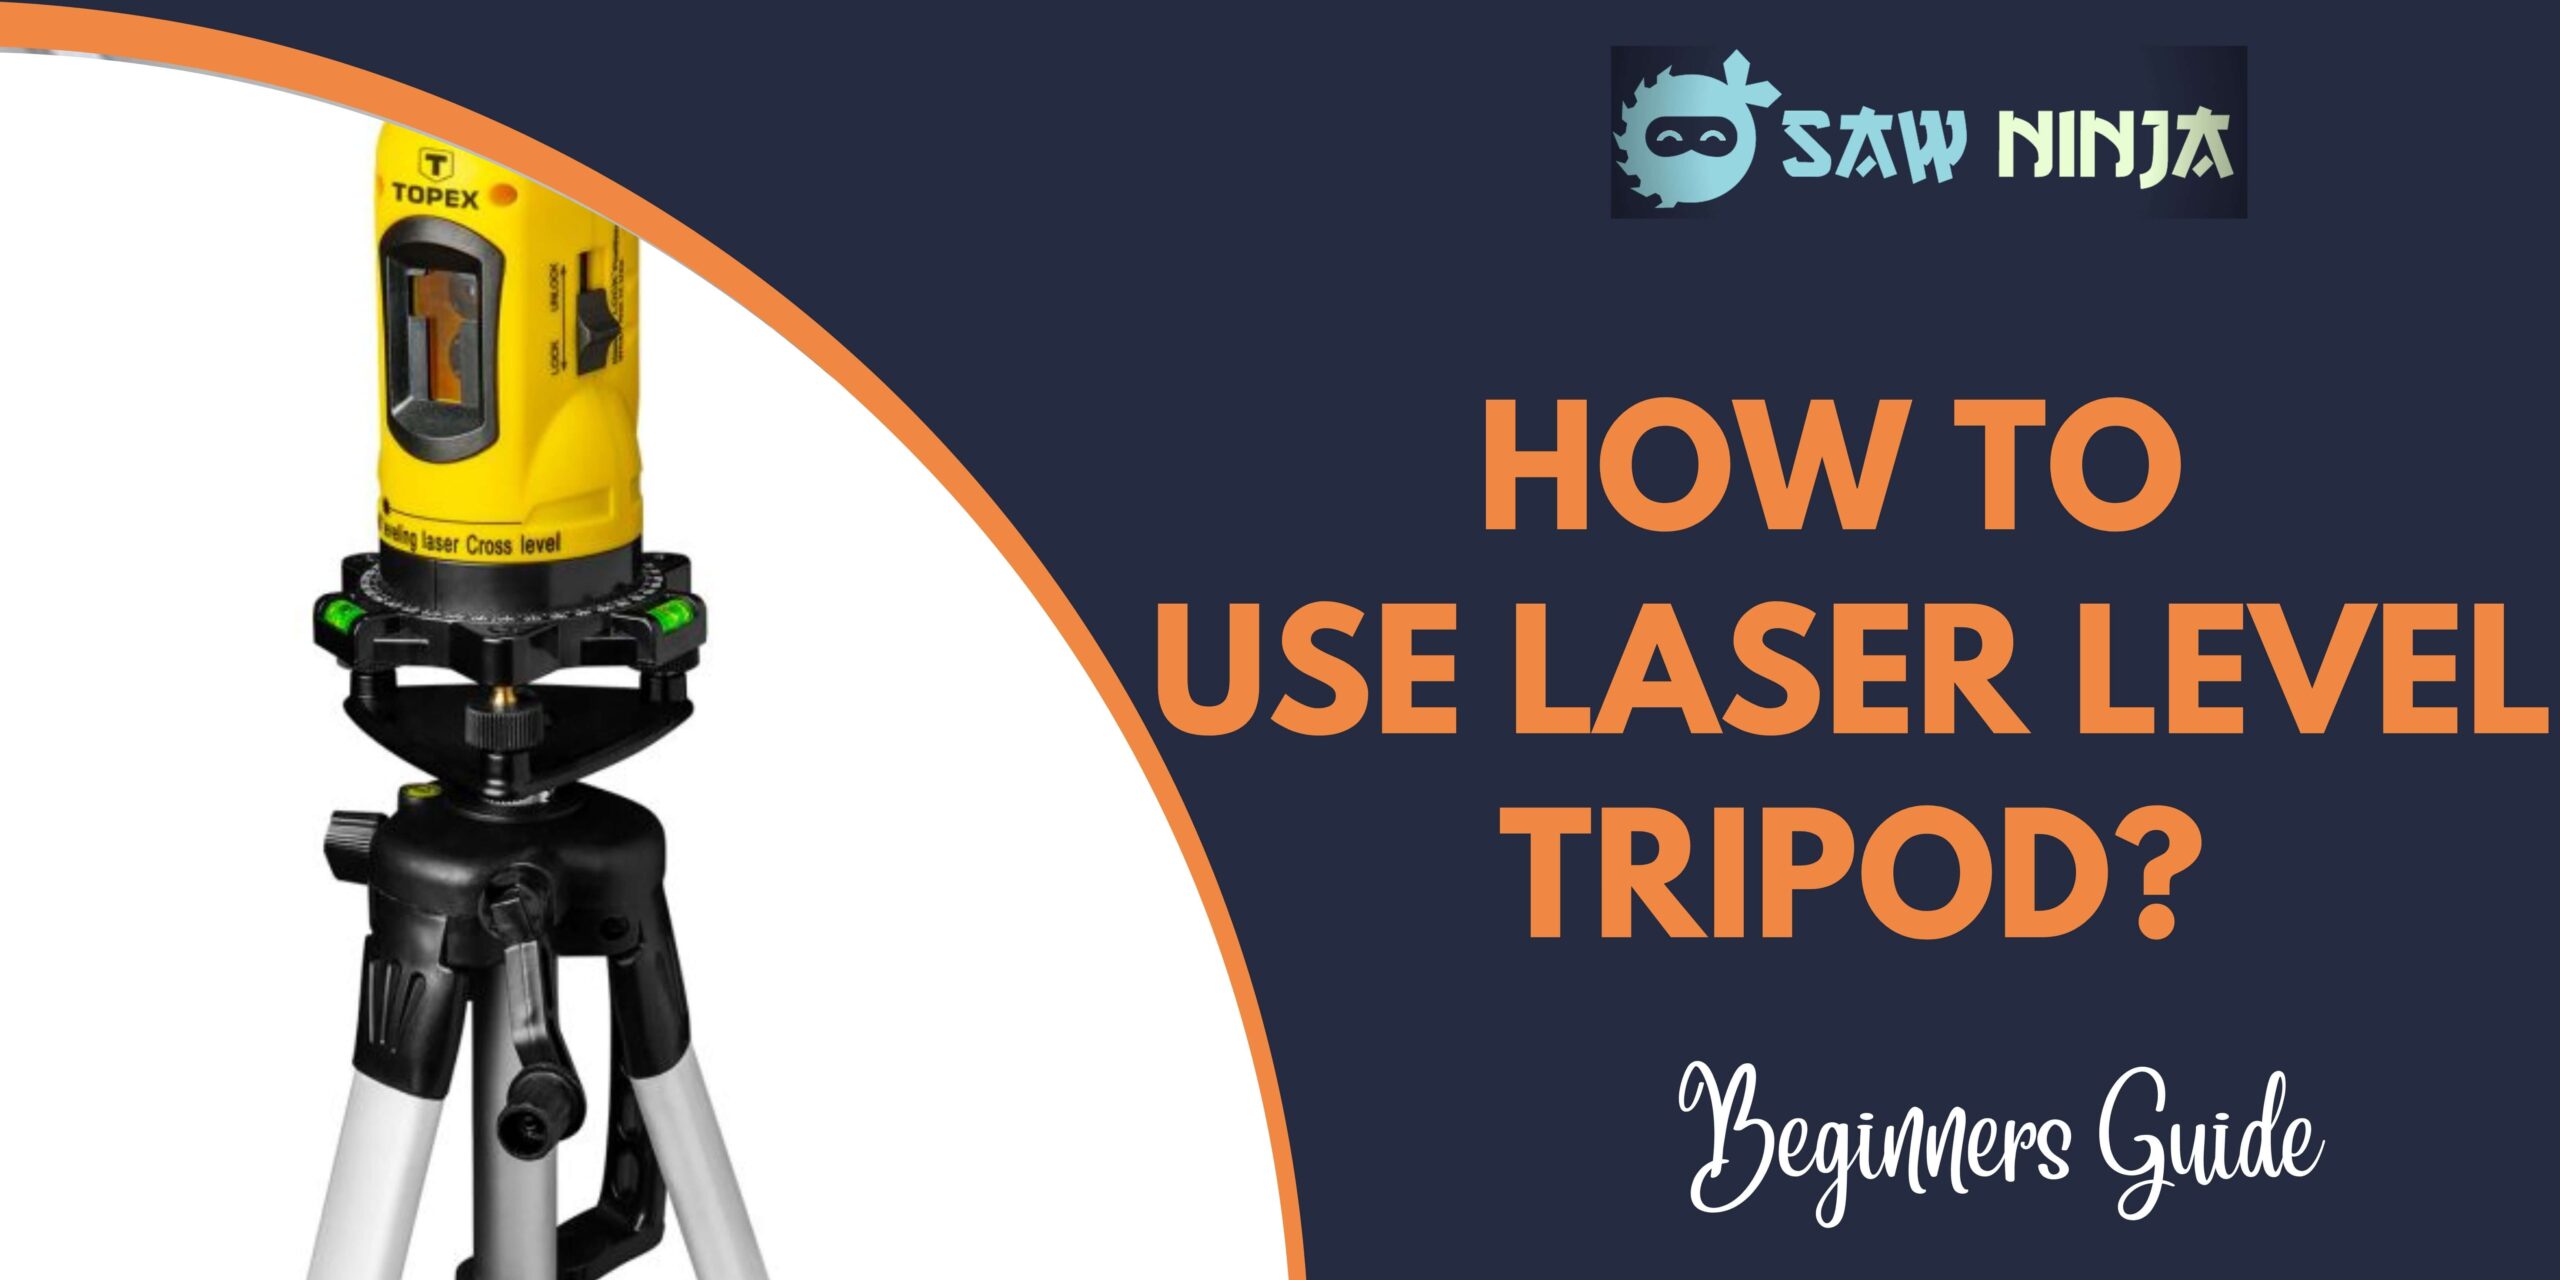 How to Use Laser Level Tripod